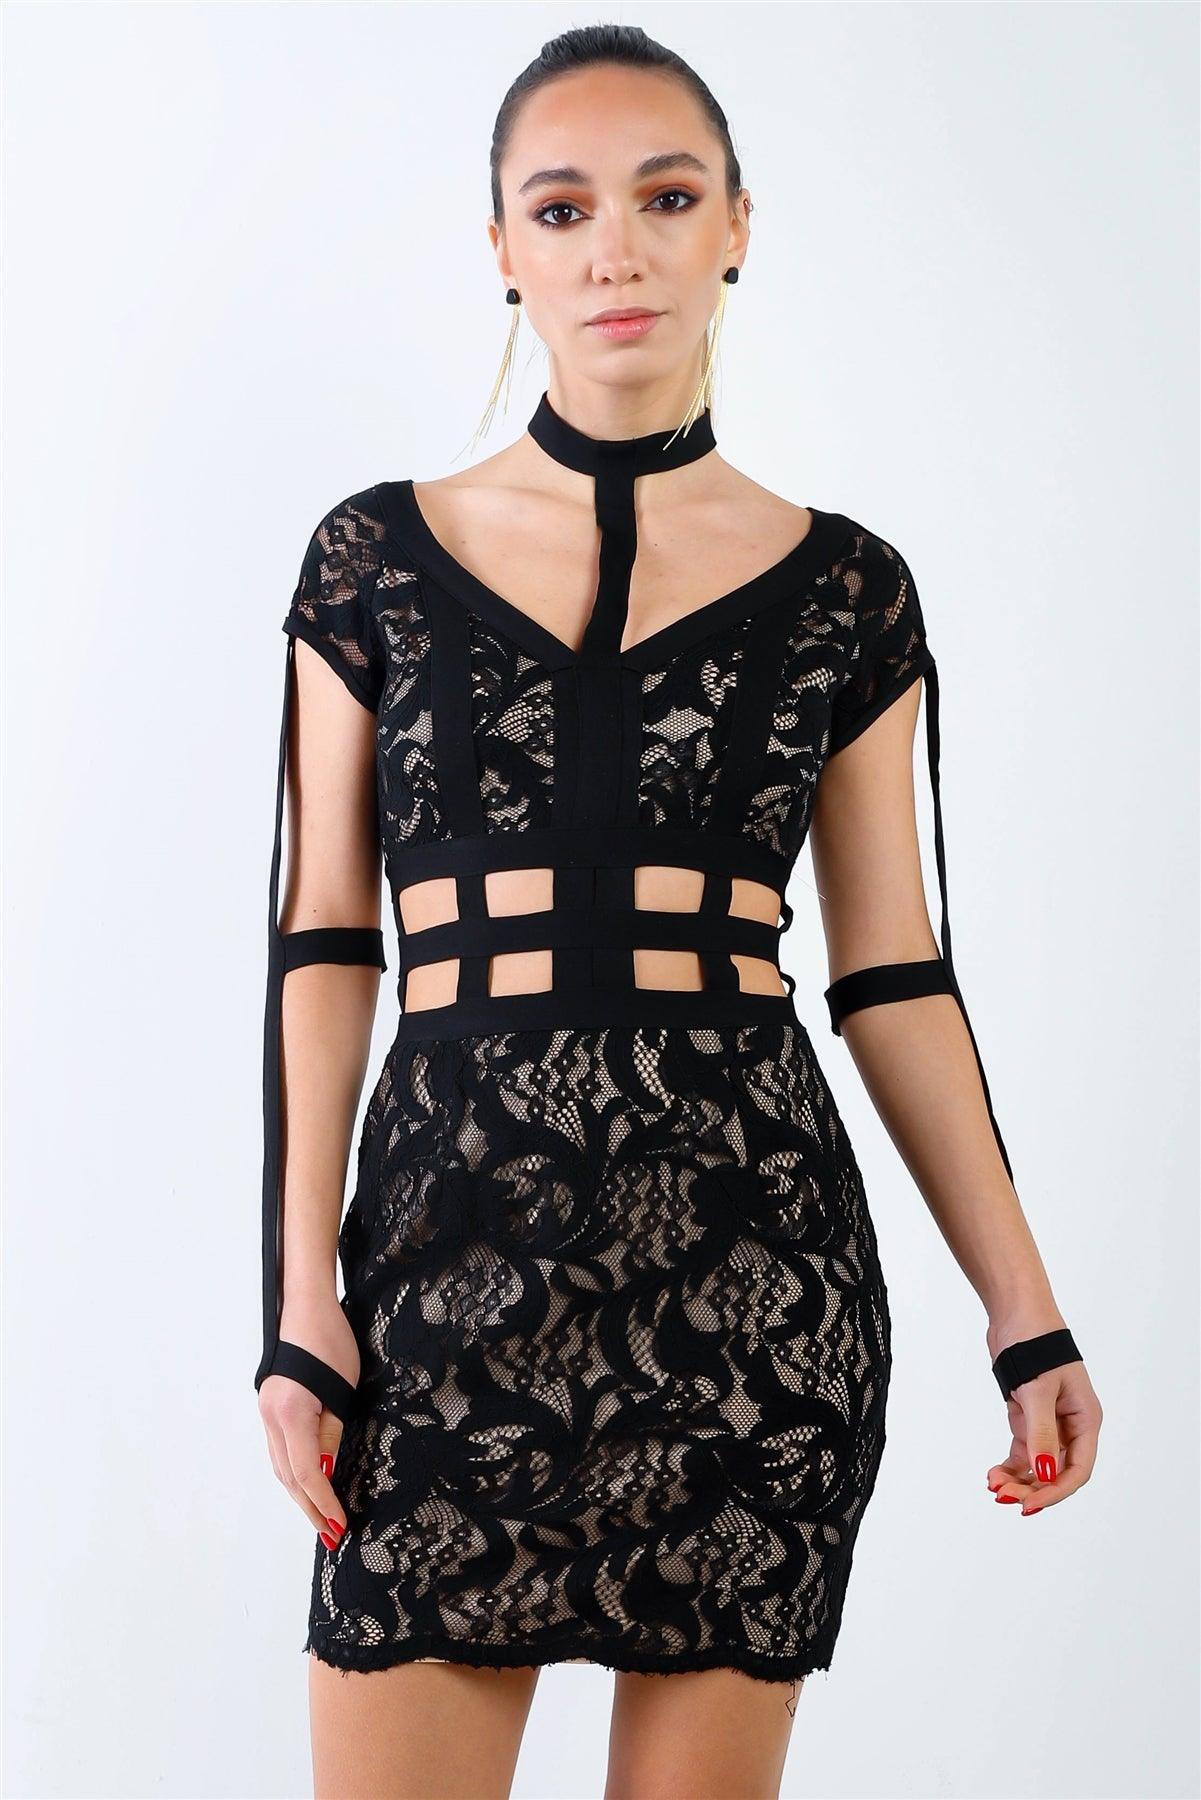 Black Lace With Nude Lining Elastic Harness Mini Dress /3-2-1